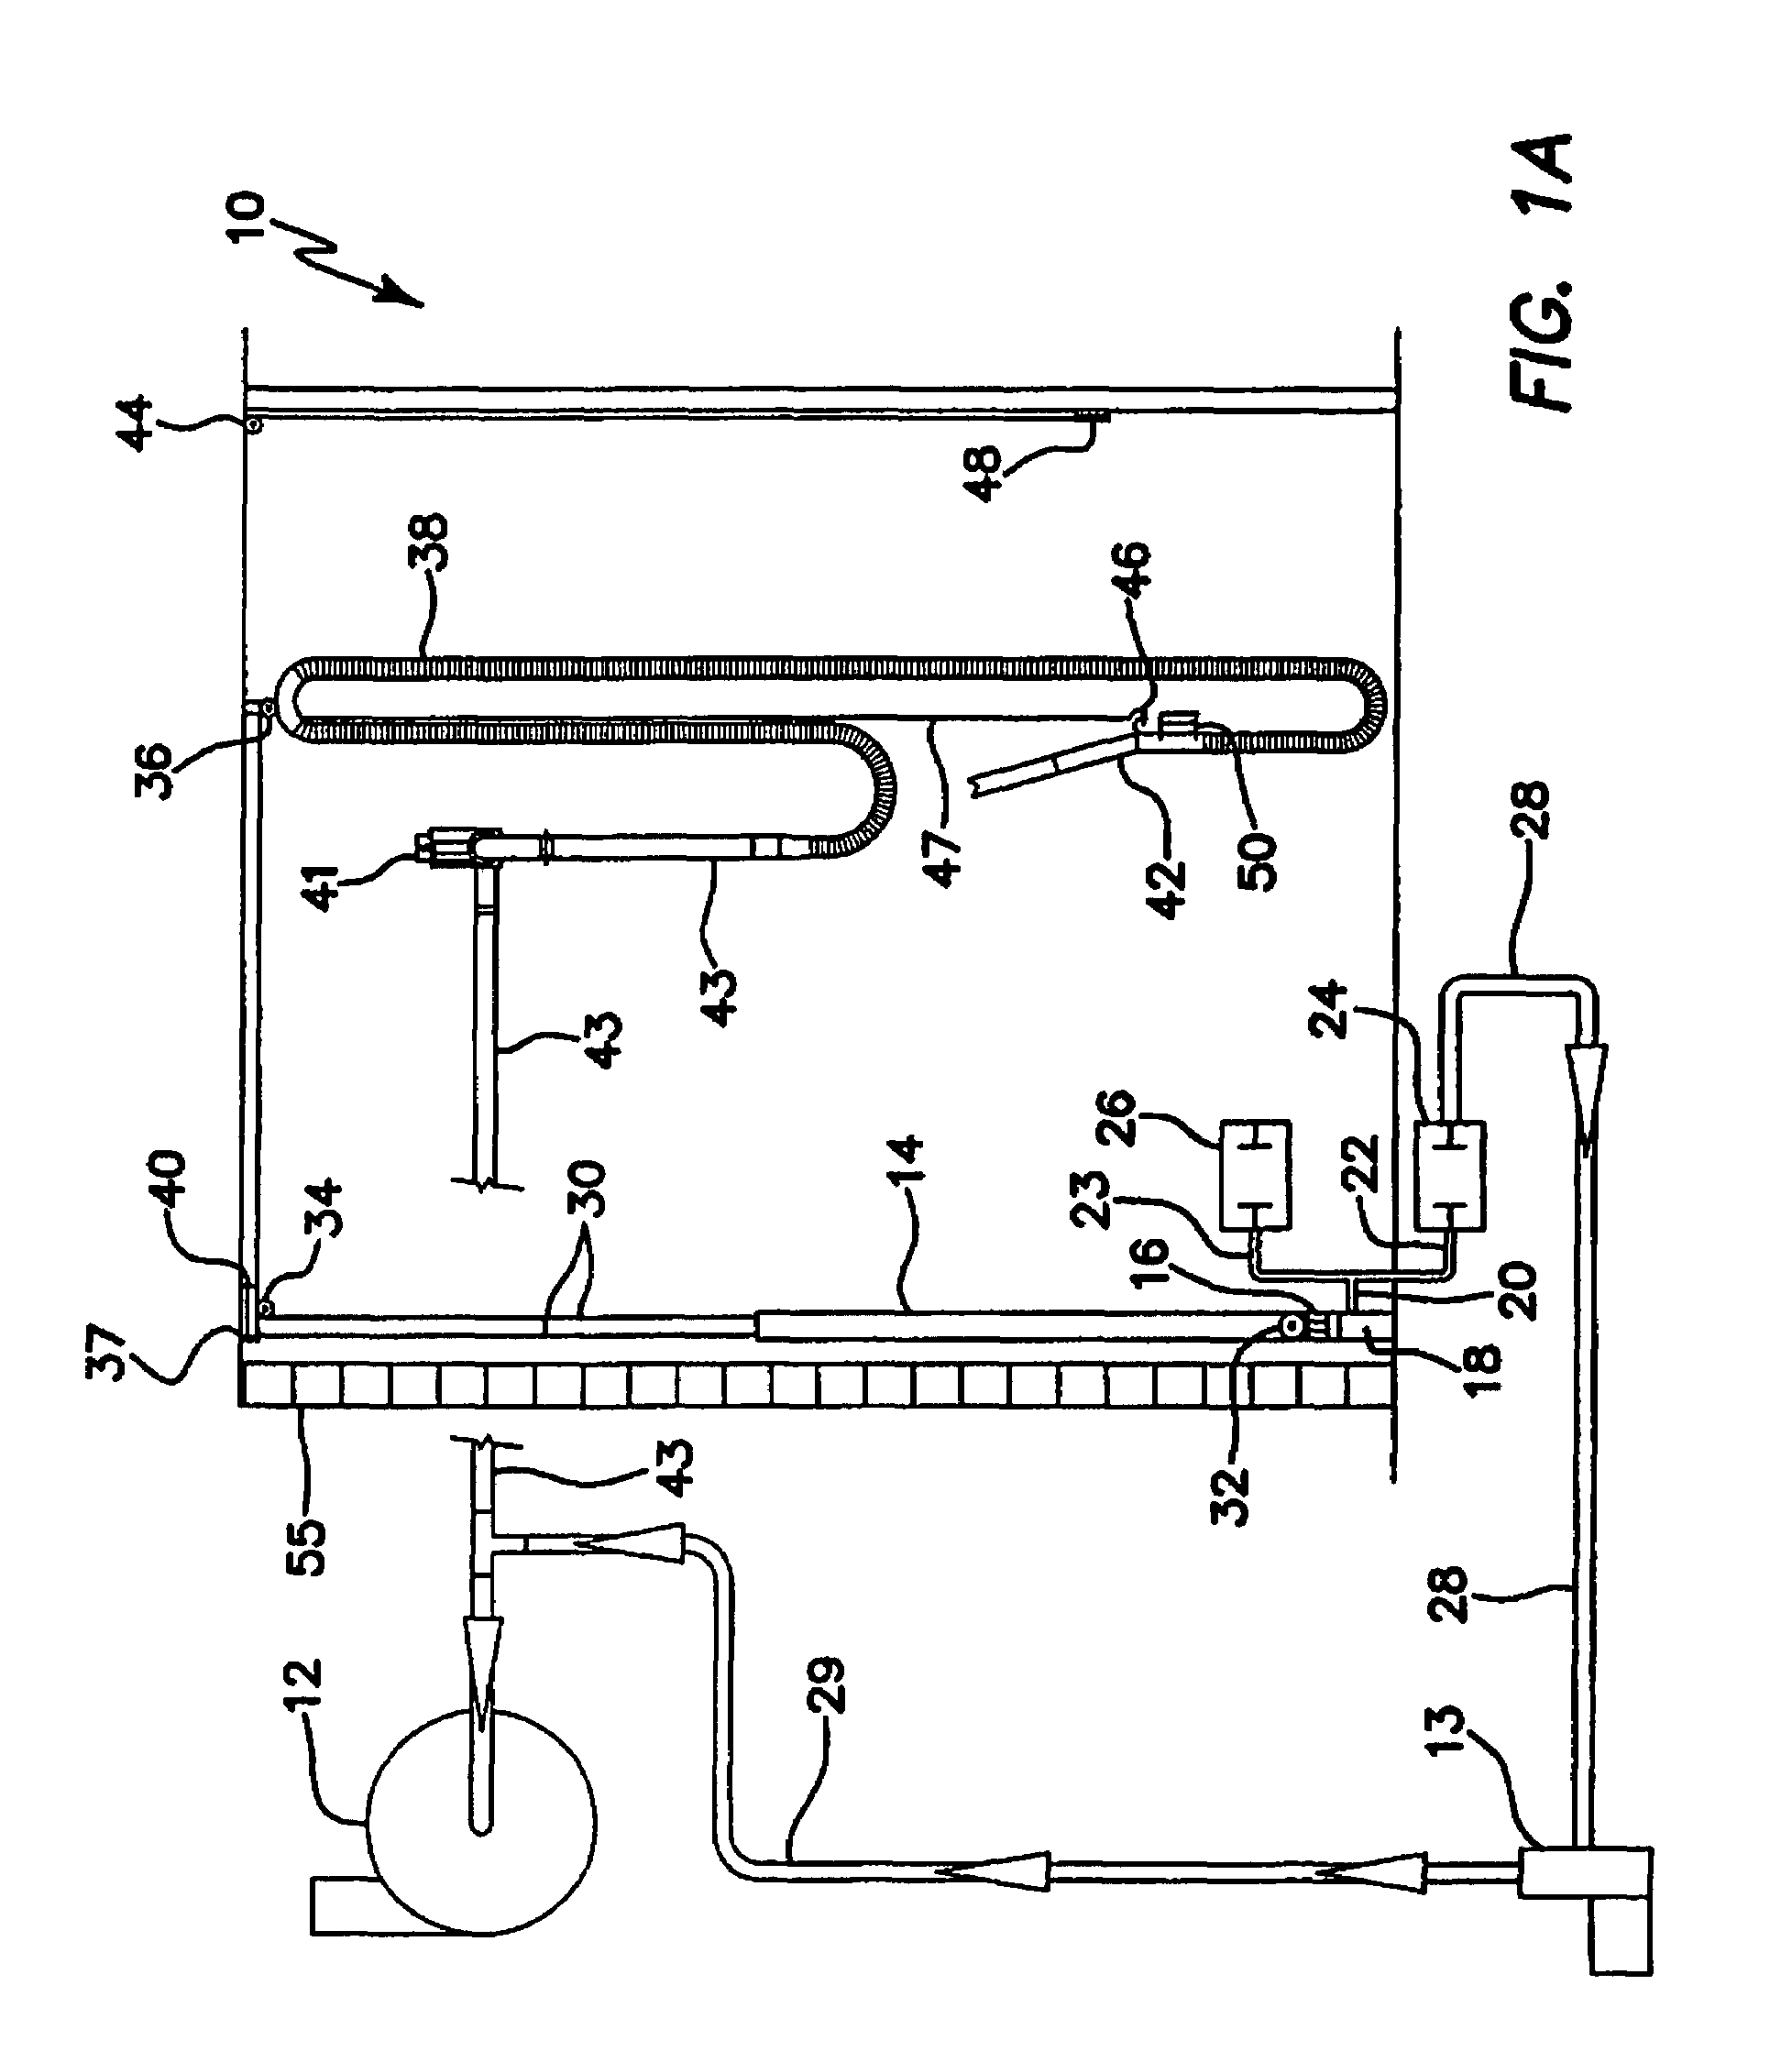 Automatic festooned hose apparatus for public transit vacuuming systems and methods for using same